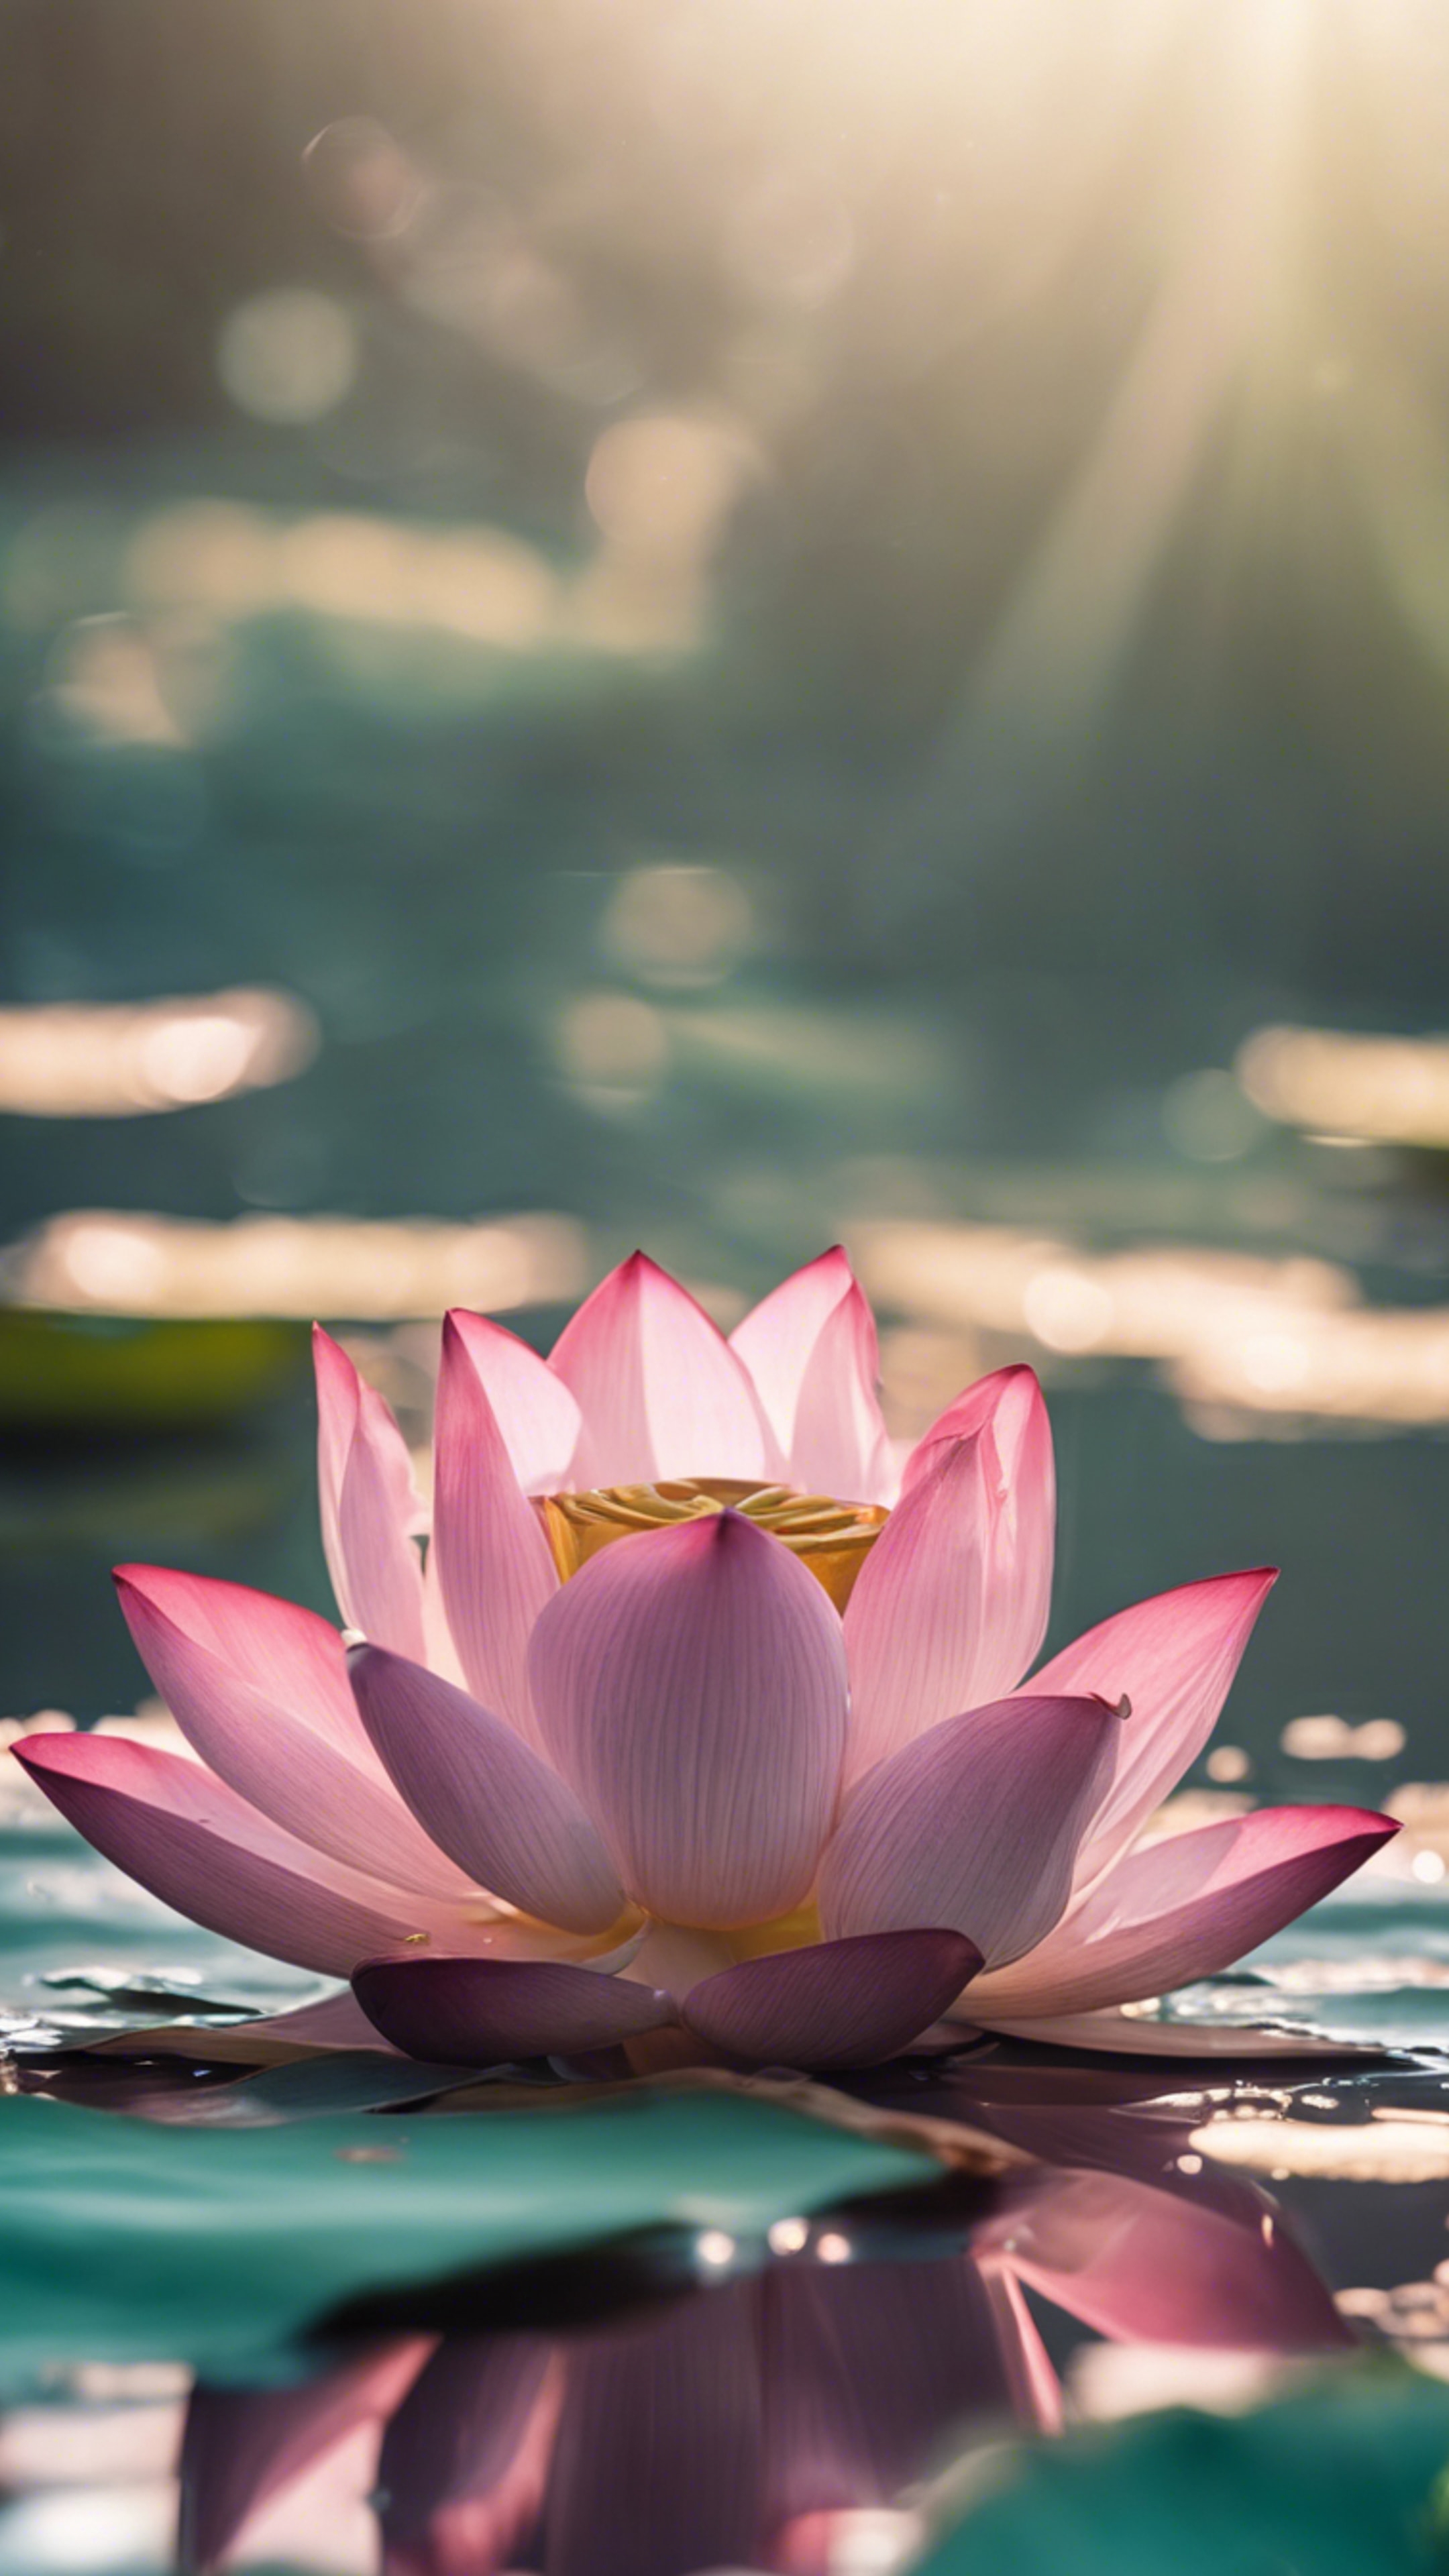 A close-up image of a single blooming lotus on a clear pond. Taustakuva[056d411e4bd14d9f8d69]